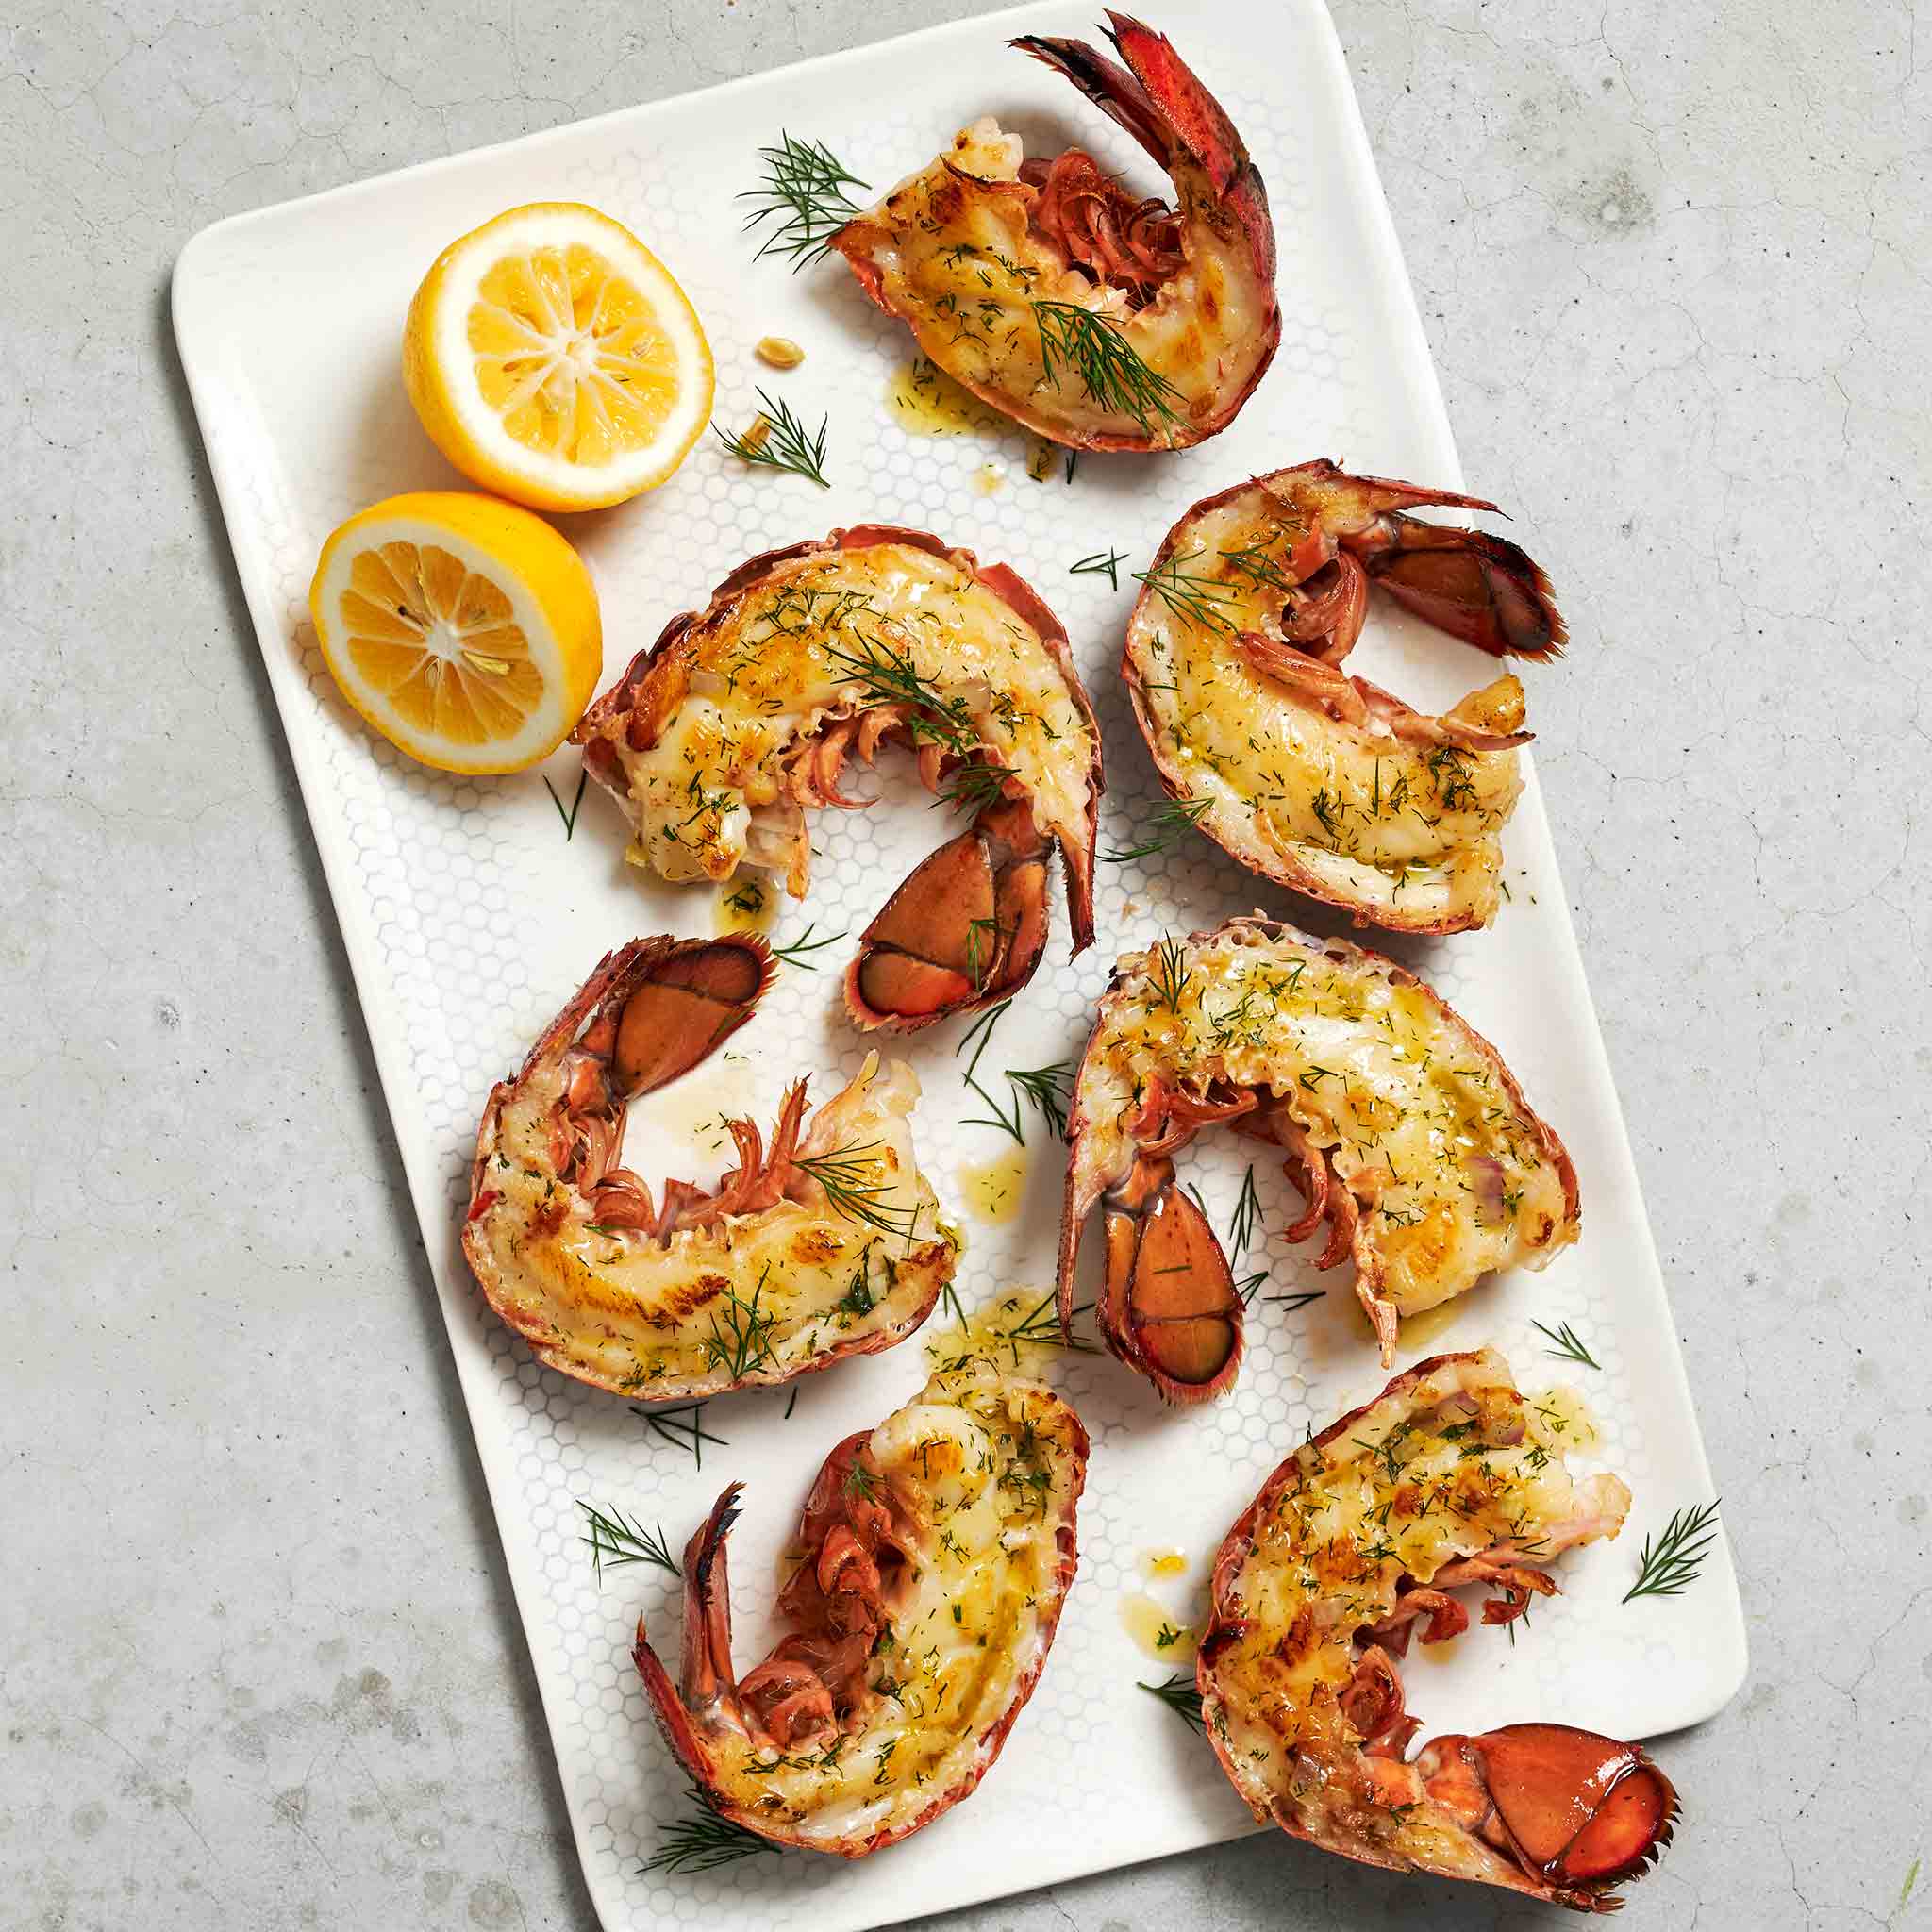 Barbecued Lobster with Garlic Butter